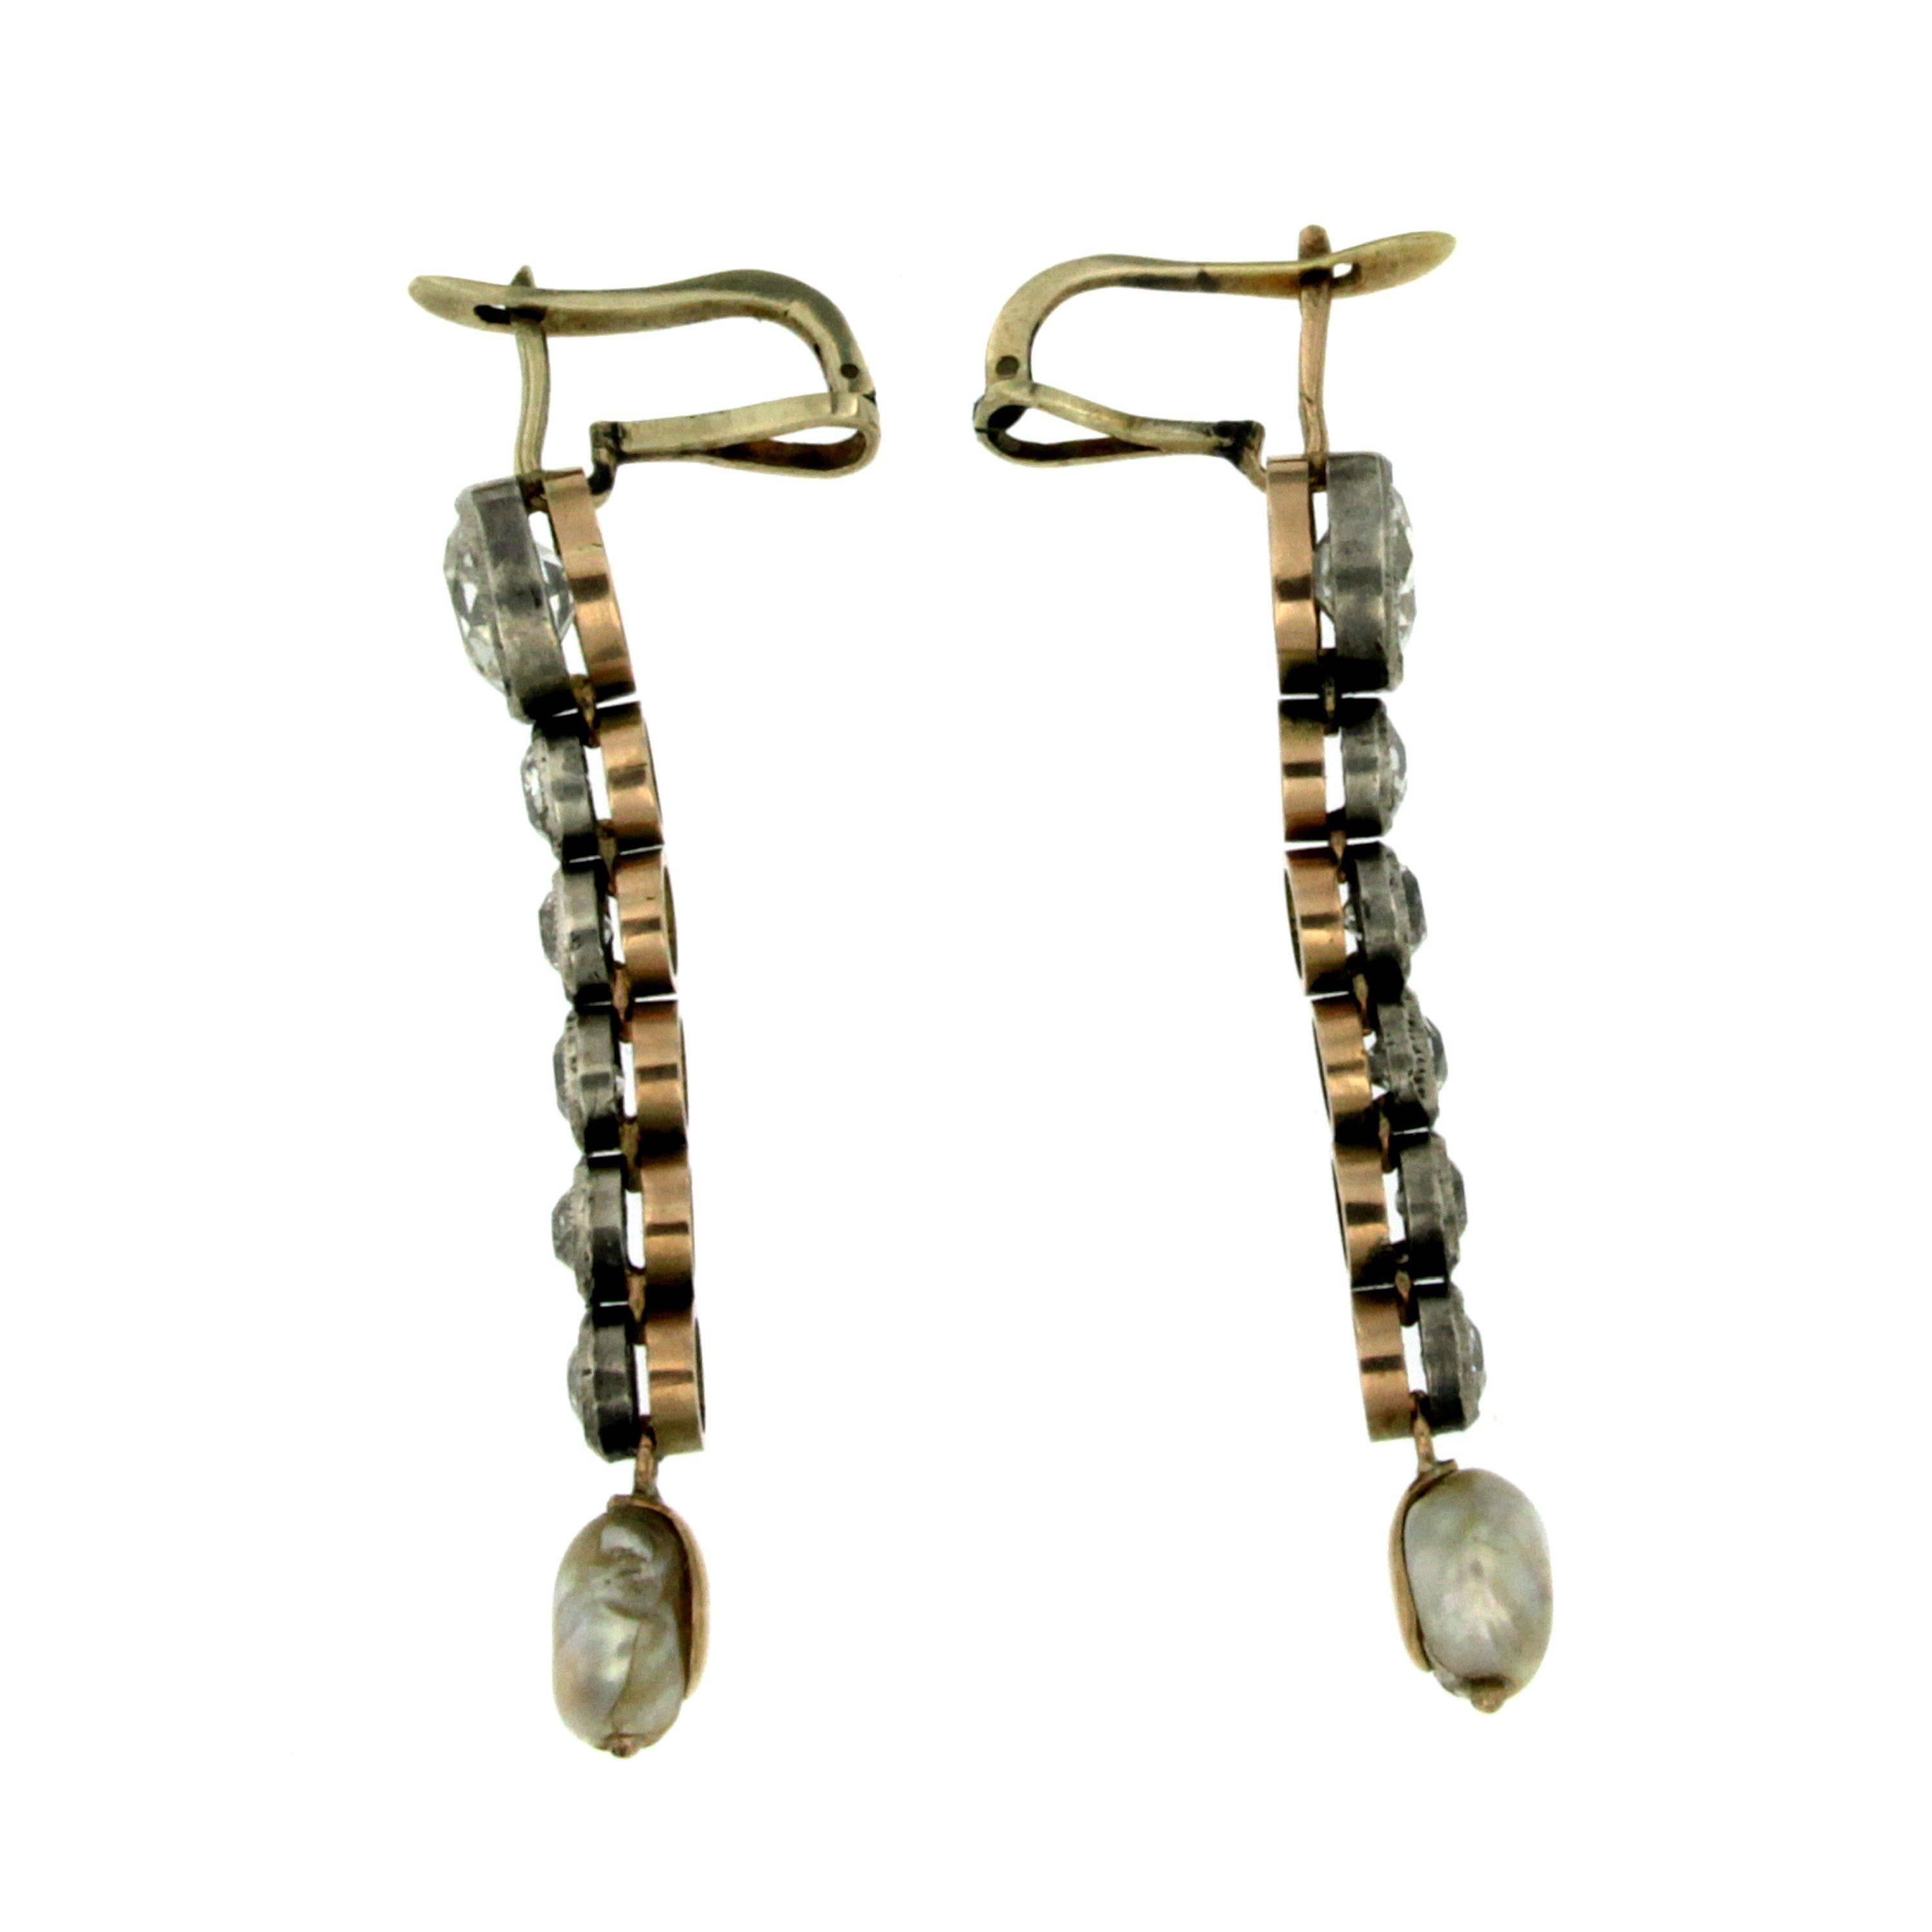 A gorgeous pair of drop earrings set in 12k gold and silver.
They are each decorated with a line of 6 old mine cut diamonds closed at their base by a natural freshwater pearl.
The 2 bigger diamonds have a total weight of 3.55 ct, and the other 10